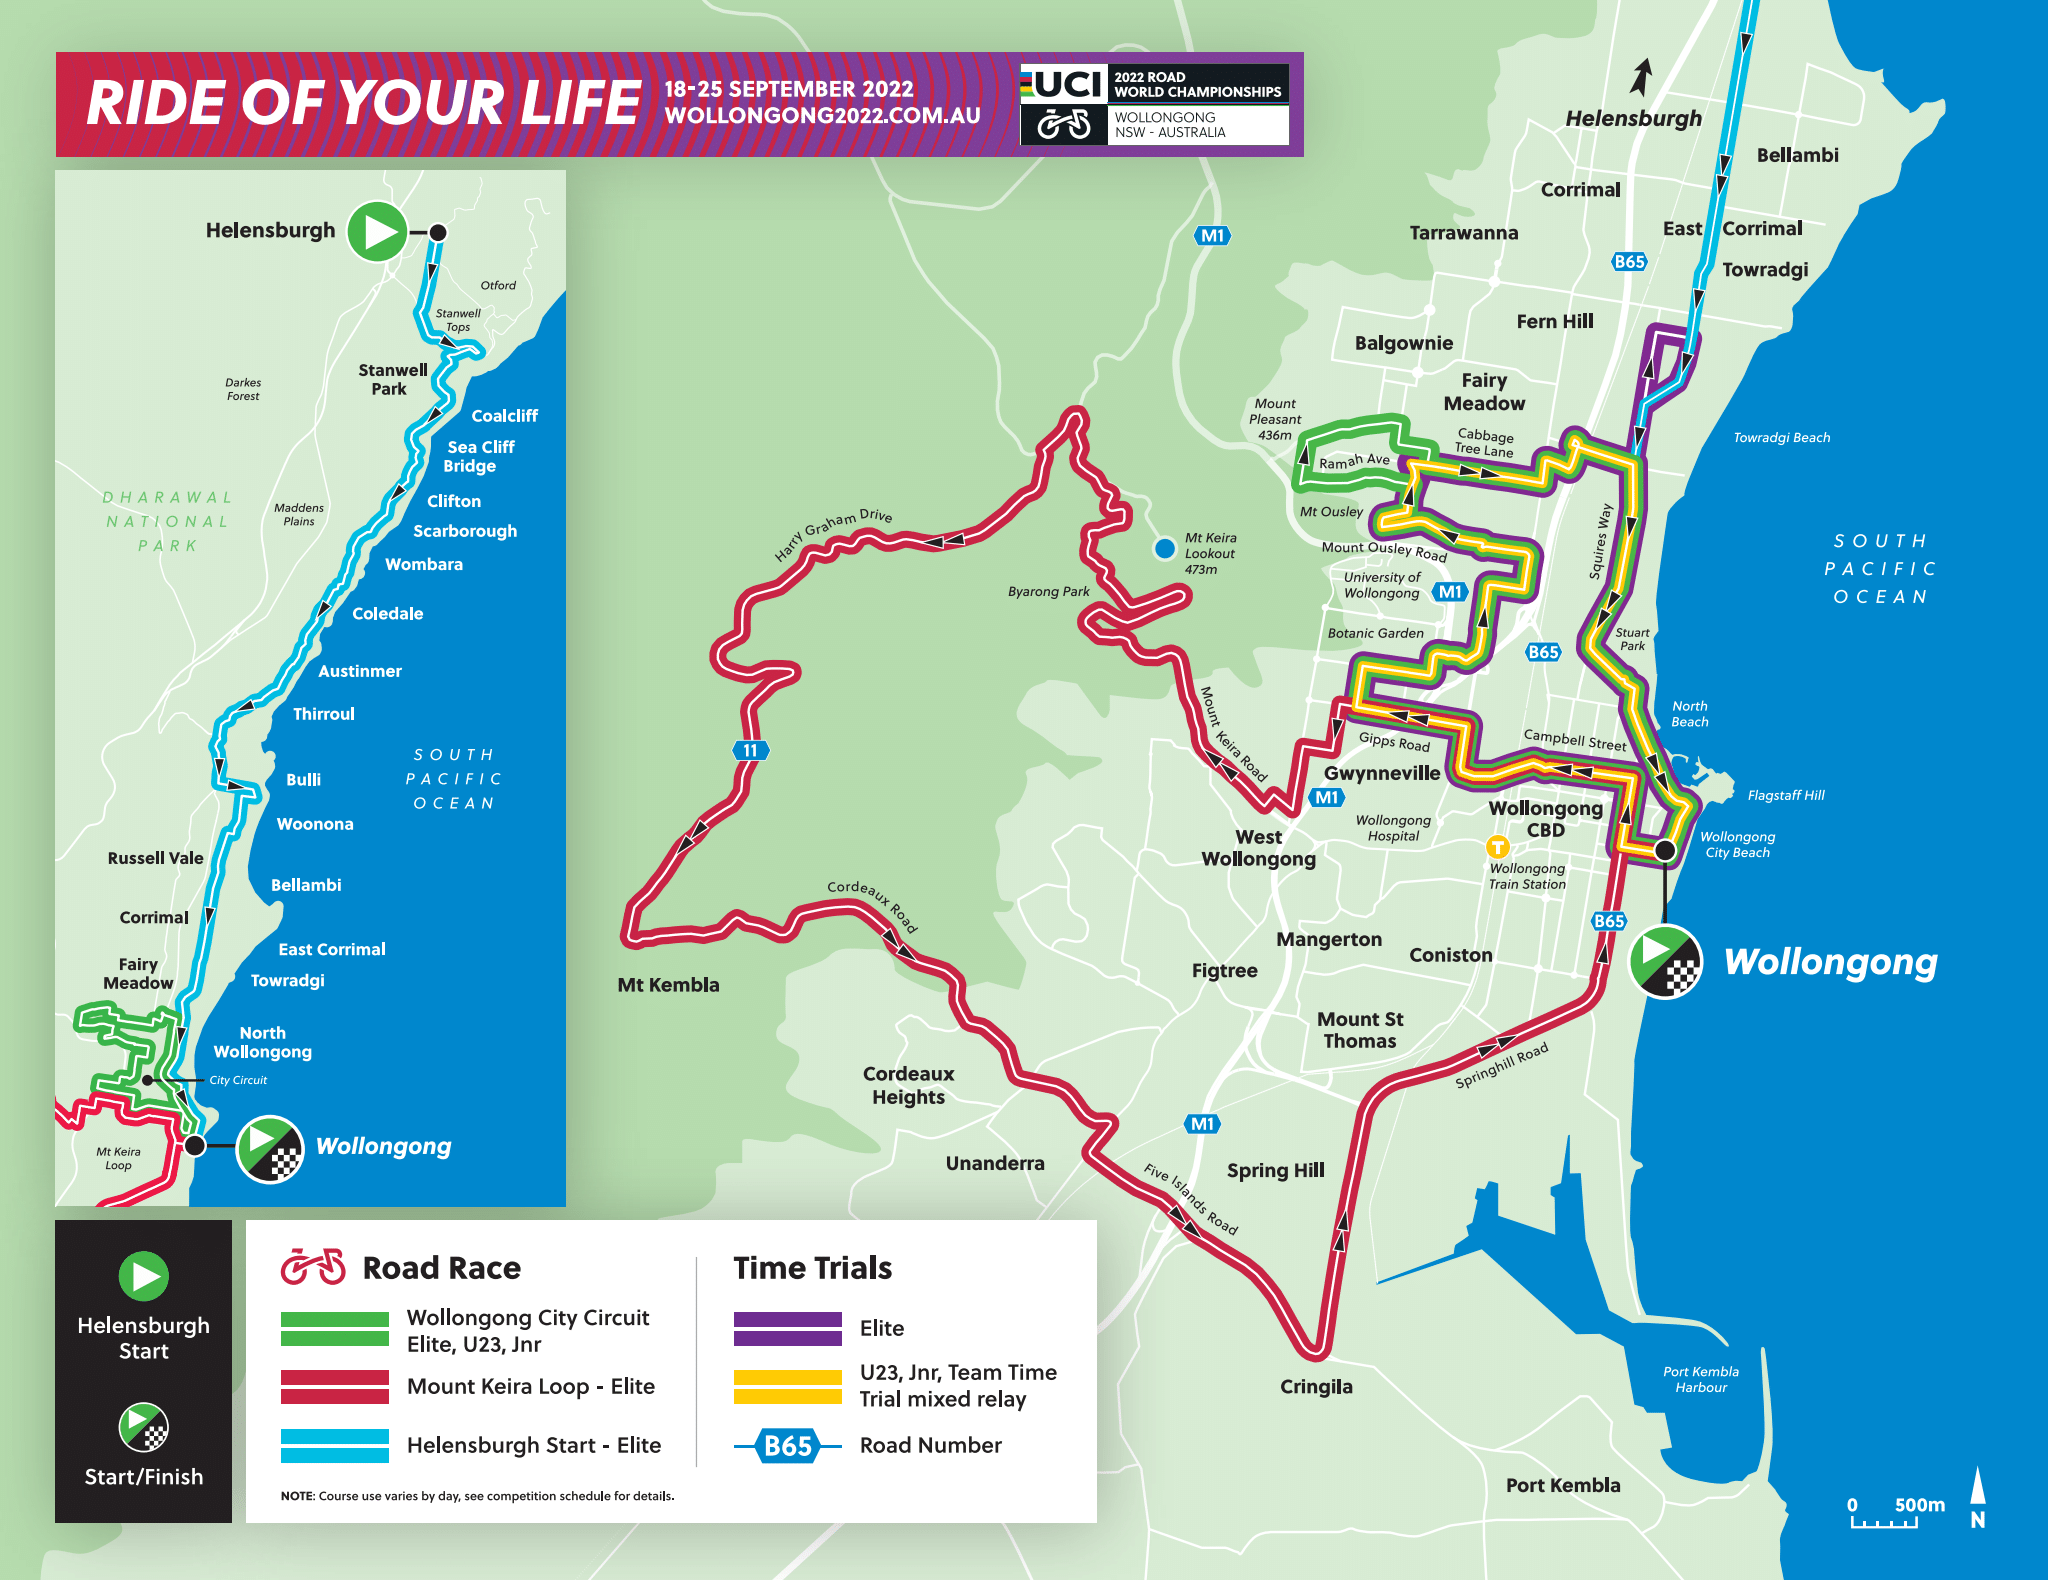 A map of Wollongong with colour-coded routes outlined.